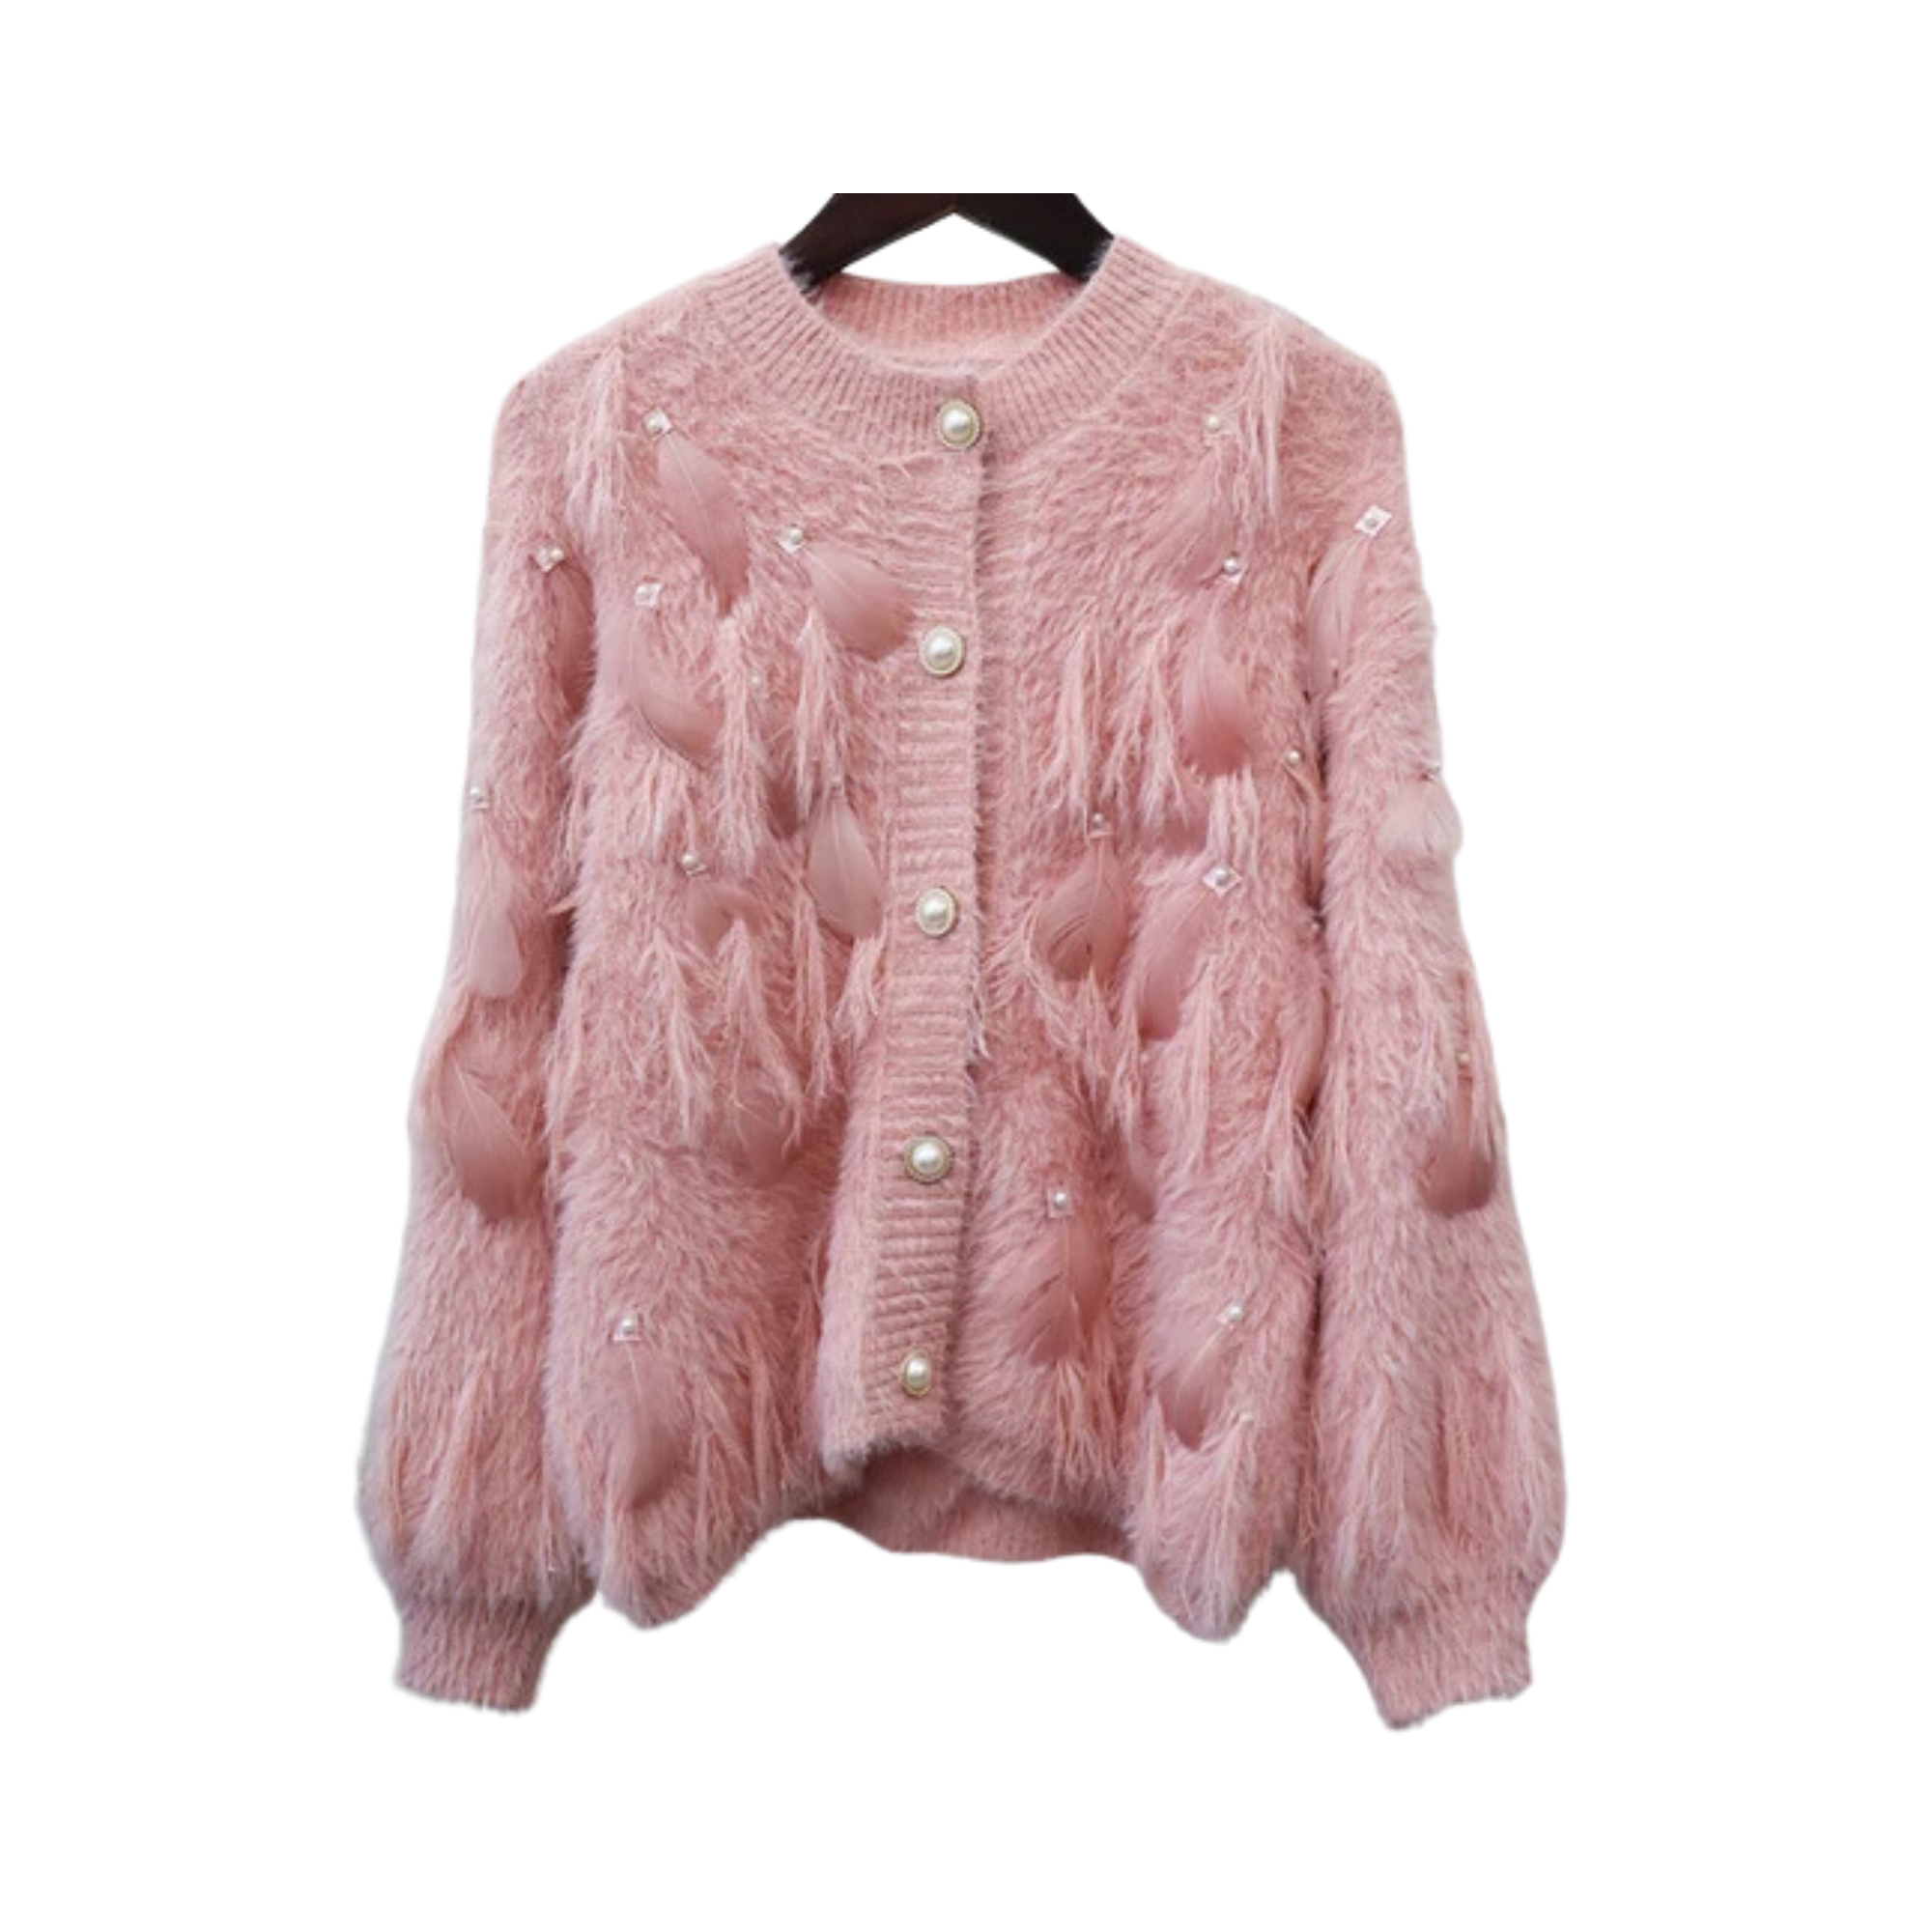 Knitted O-Neck Tassel Feathered Cardigan - Pre Order: Ships Feb 29